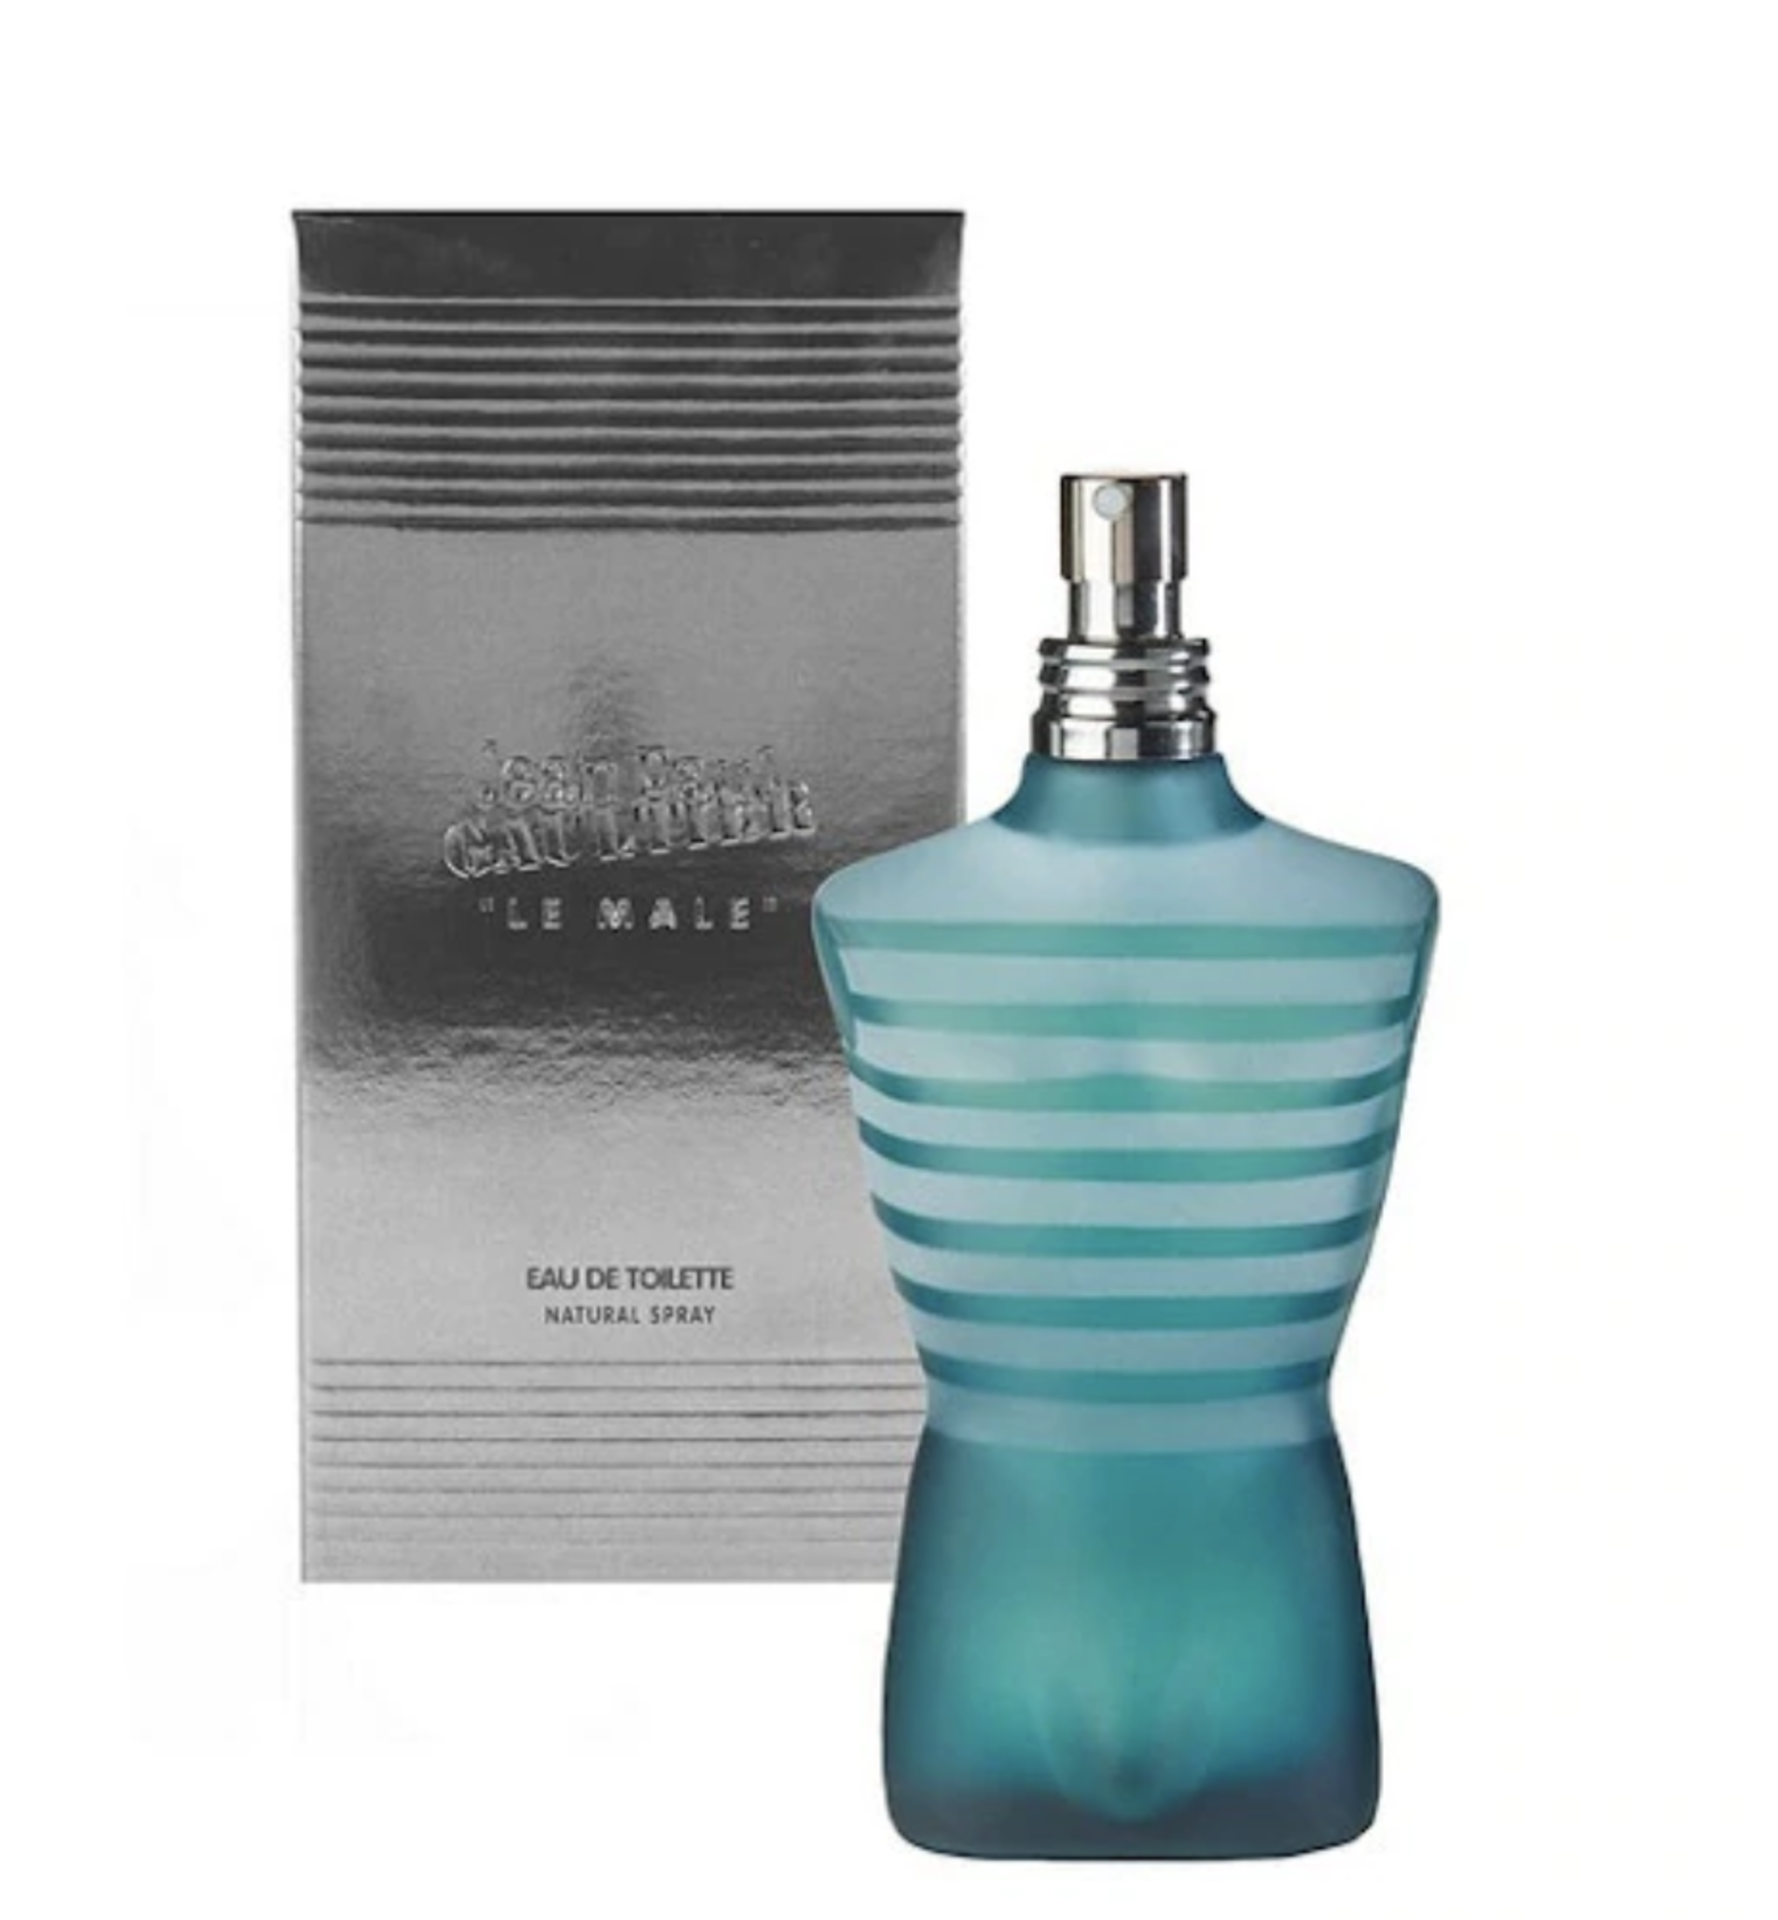 BOXED JEAN PAUL GAULTIER LE MALE, 40ML BOTTLE, NATURAL SPRAY, RRP-£34.50Condition ReportAppraisal